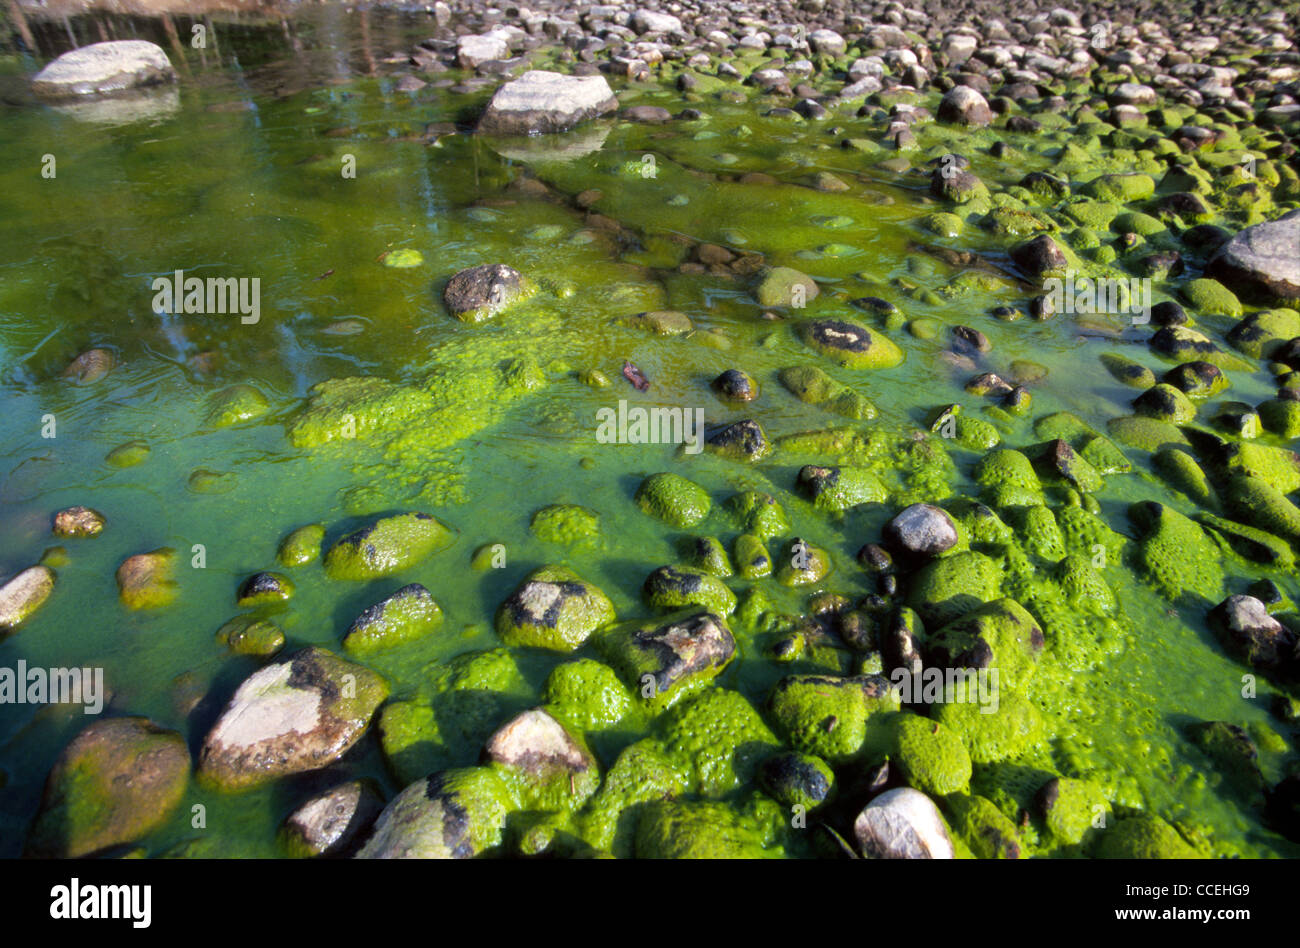 Algae-covered rocks add a bright greenish color to the Vermilion Lakes wetlands in the Bow River Valley in Banff National Park, Alberta, Canada Stock Photo